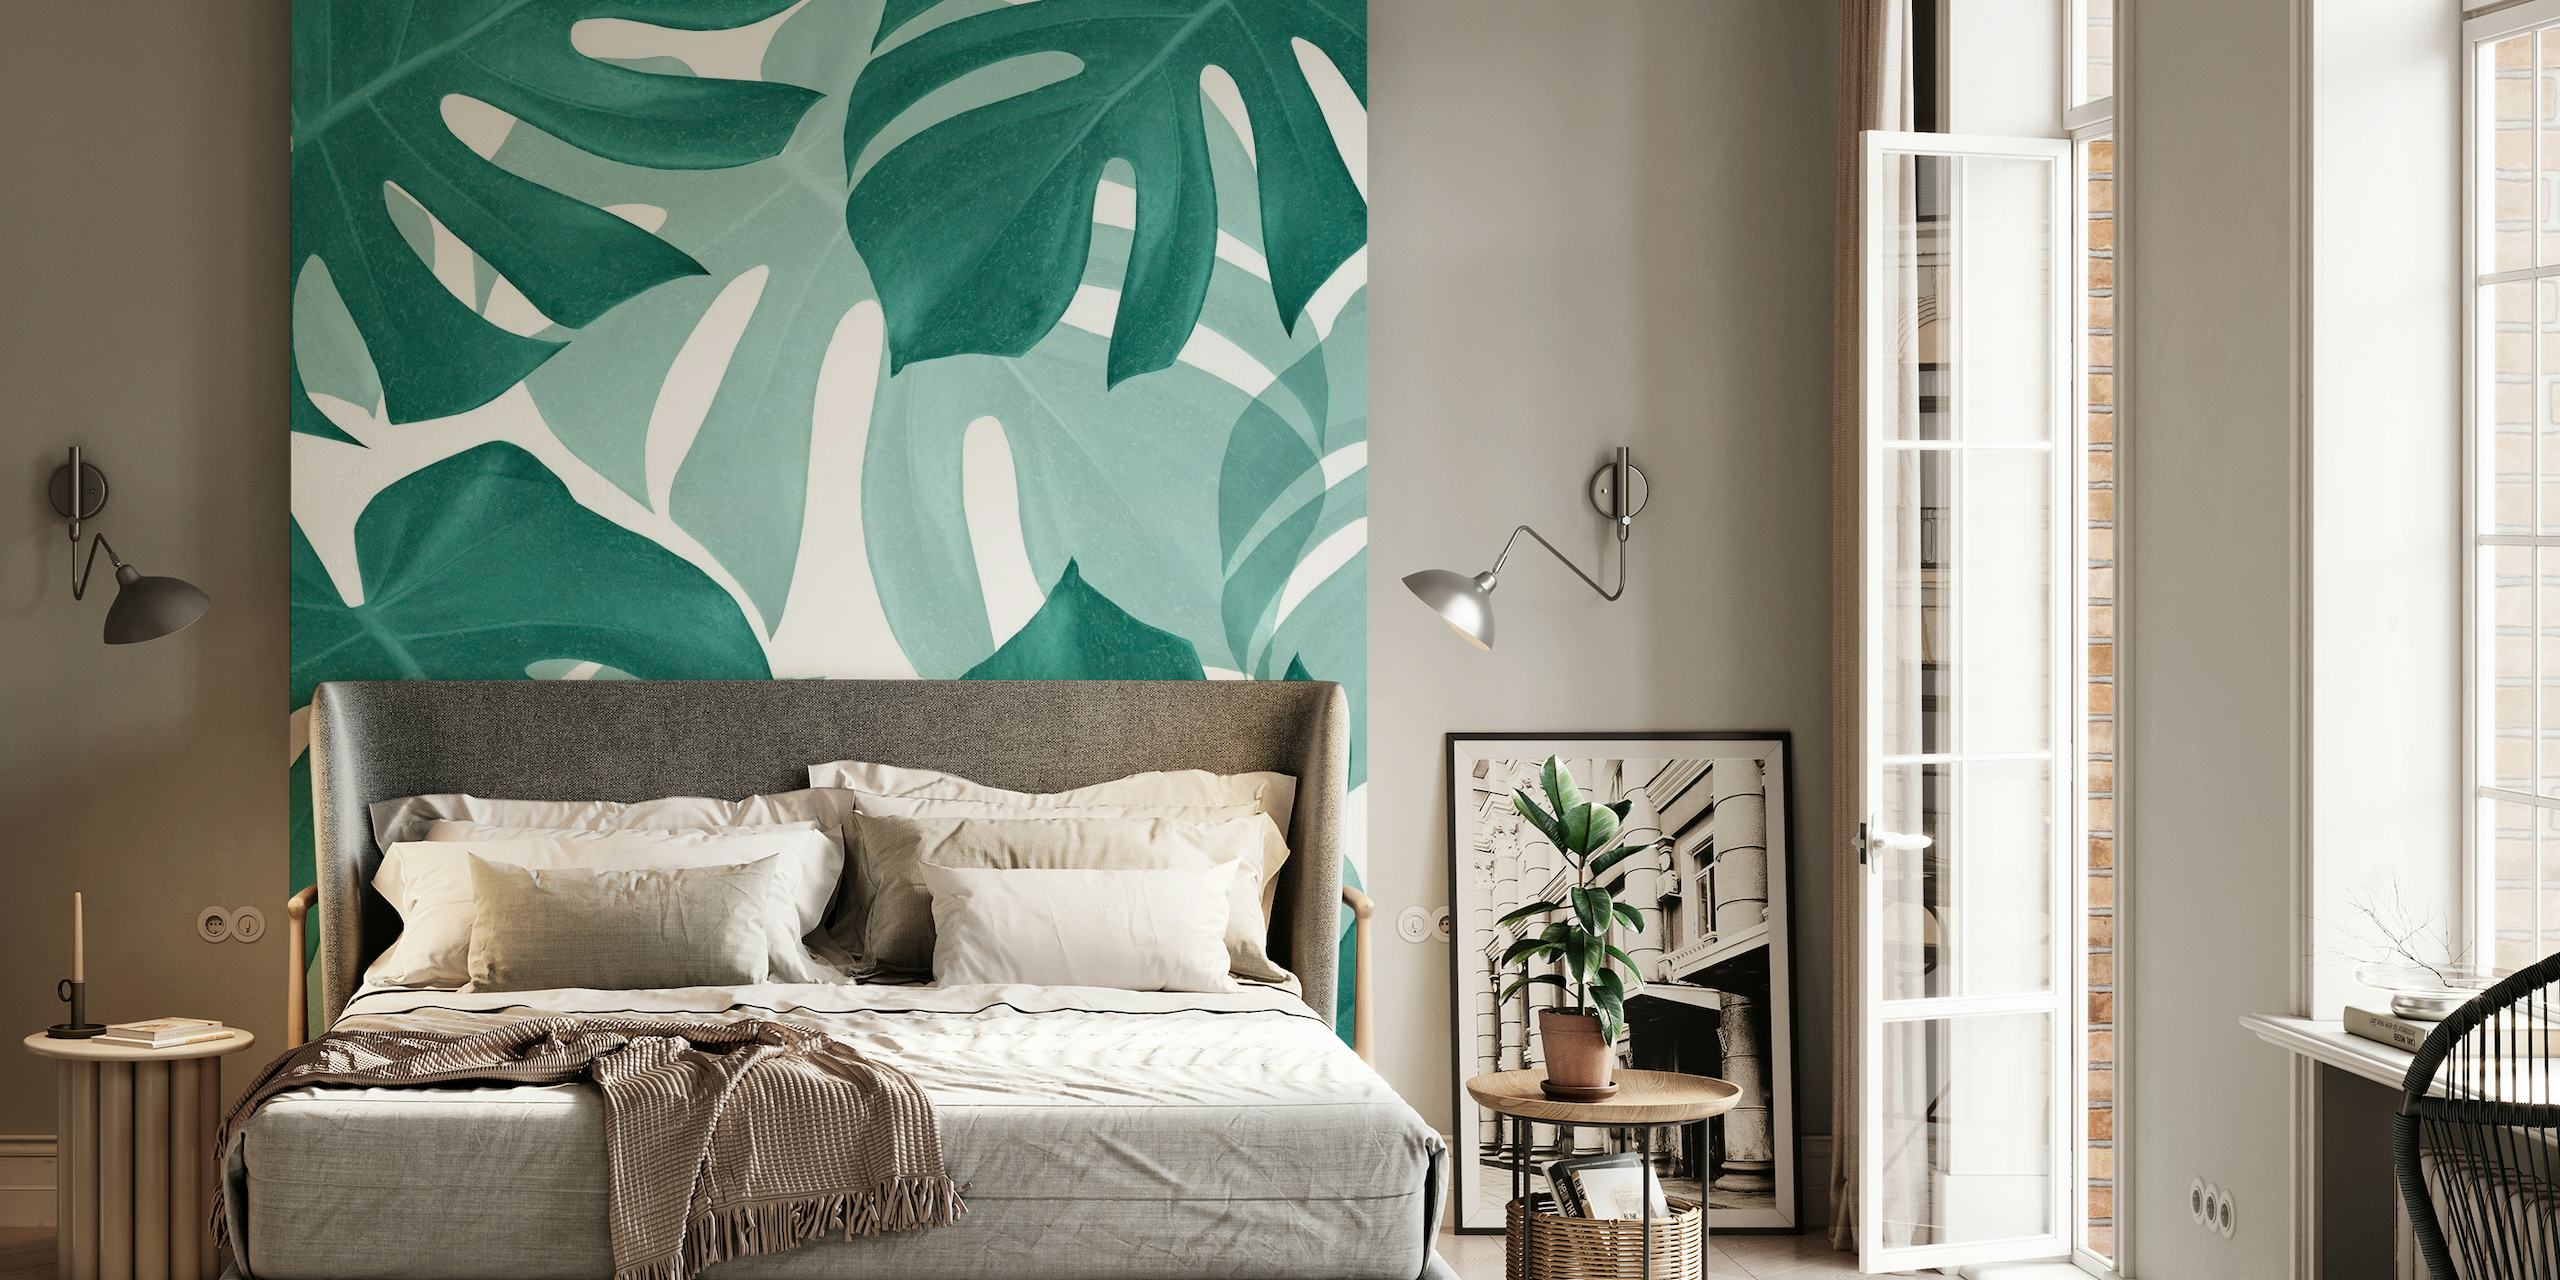 Monstera Leaves Vibes 1 wall mural with teal and white tropical leaves